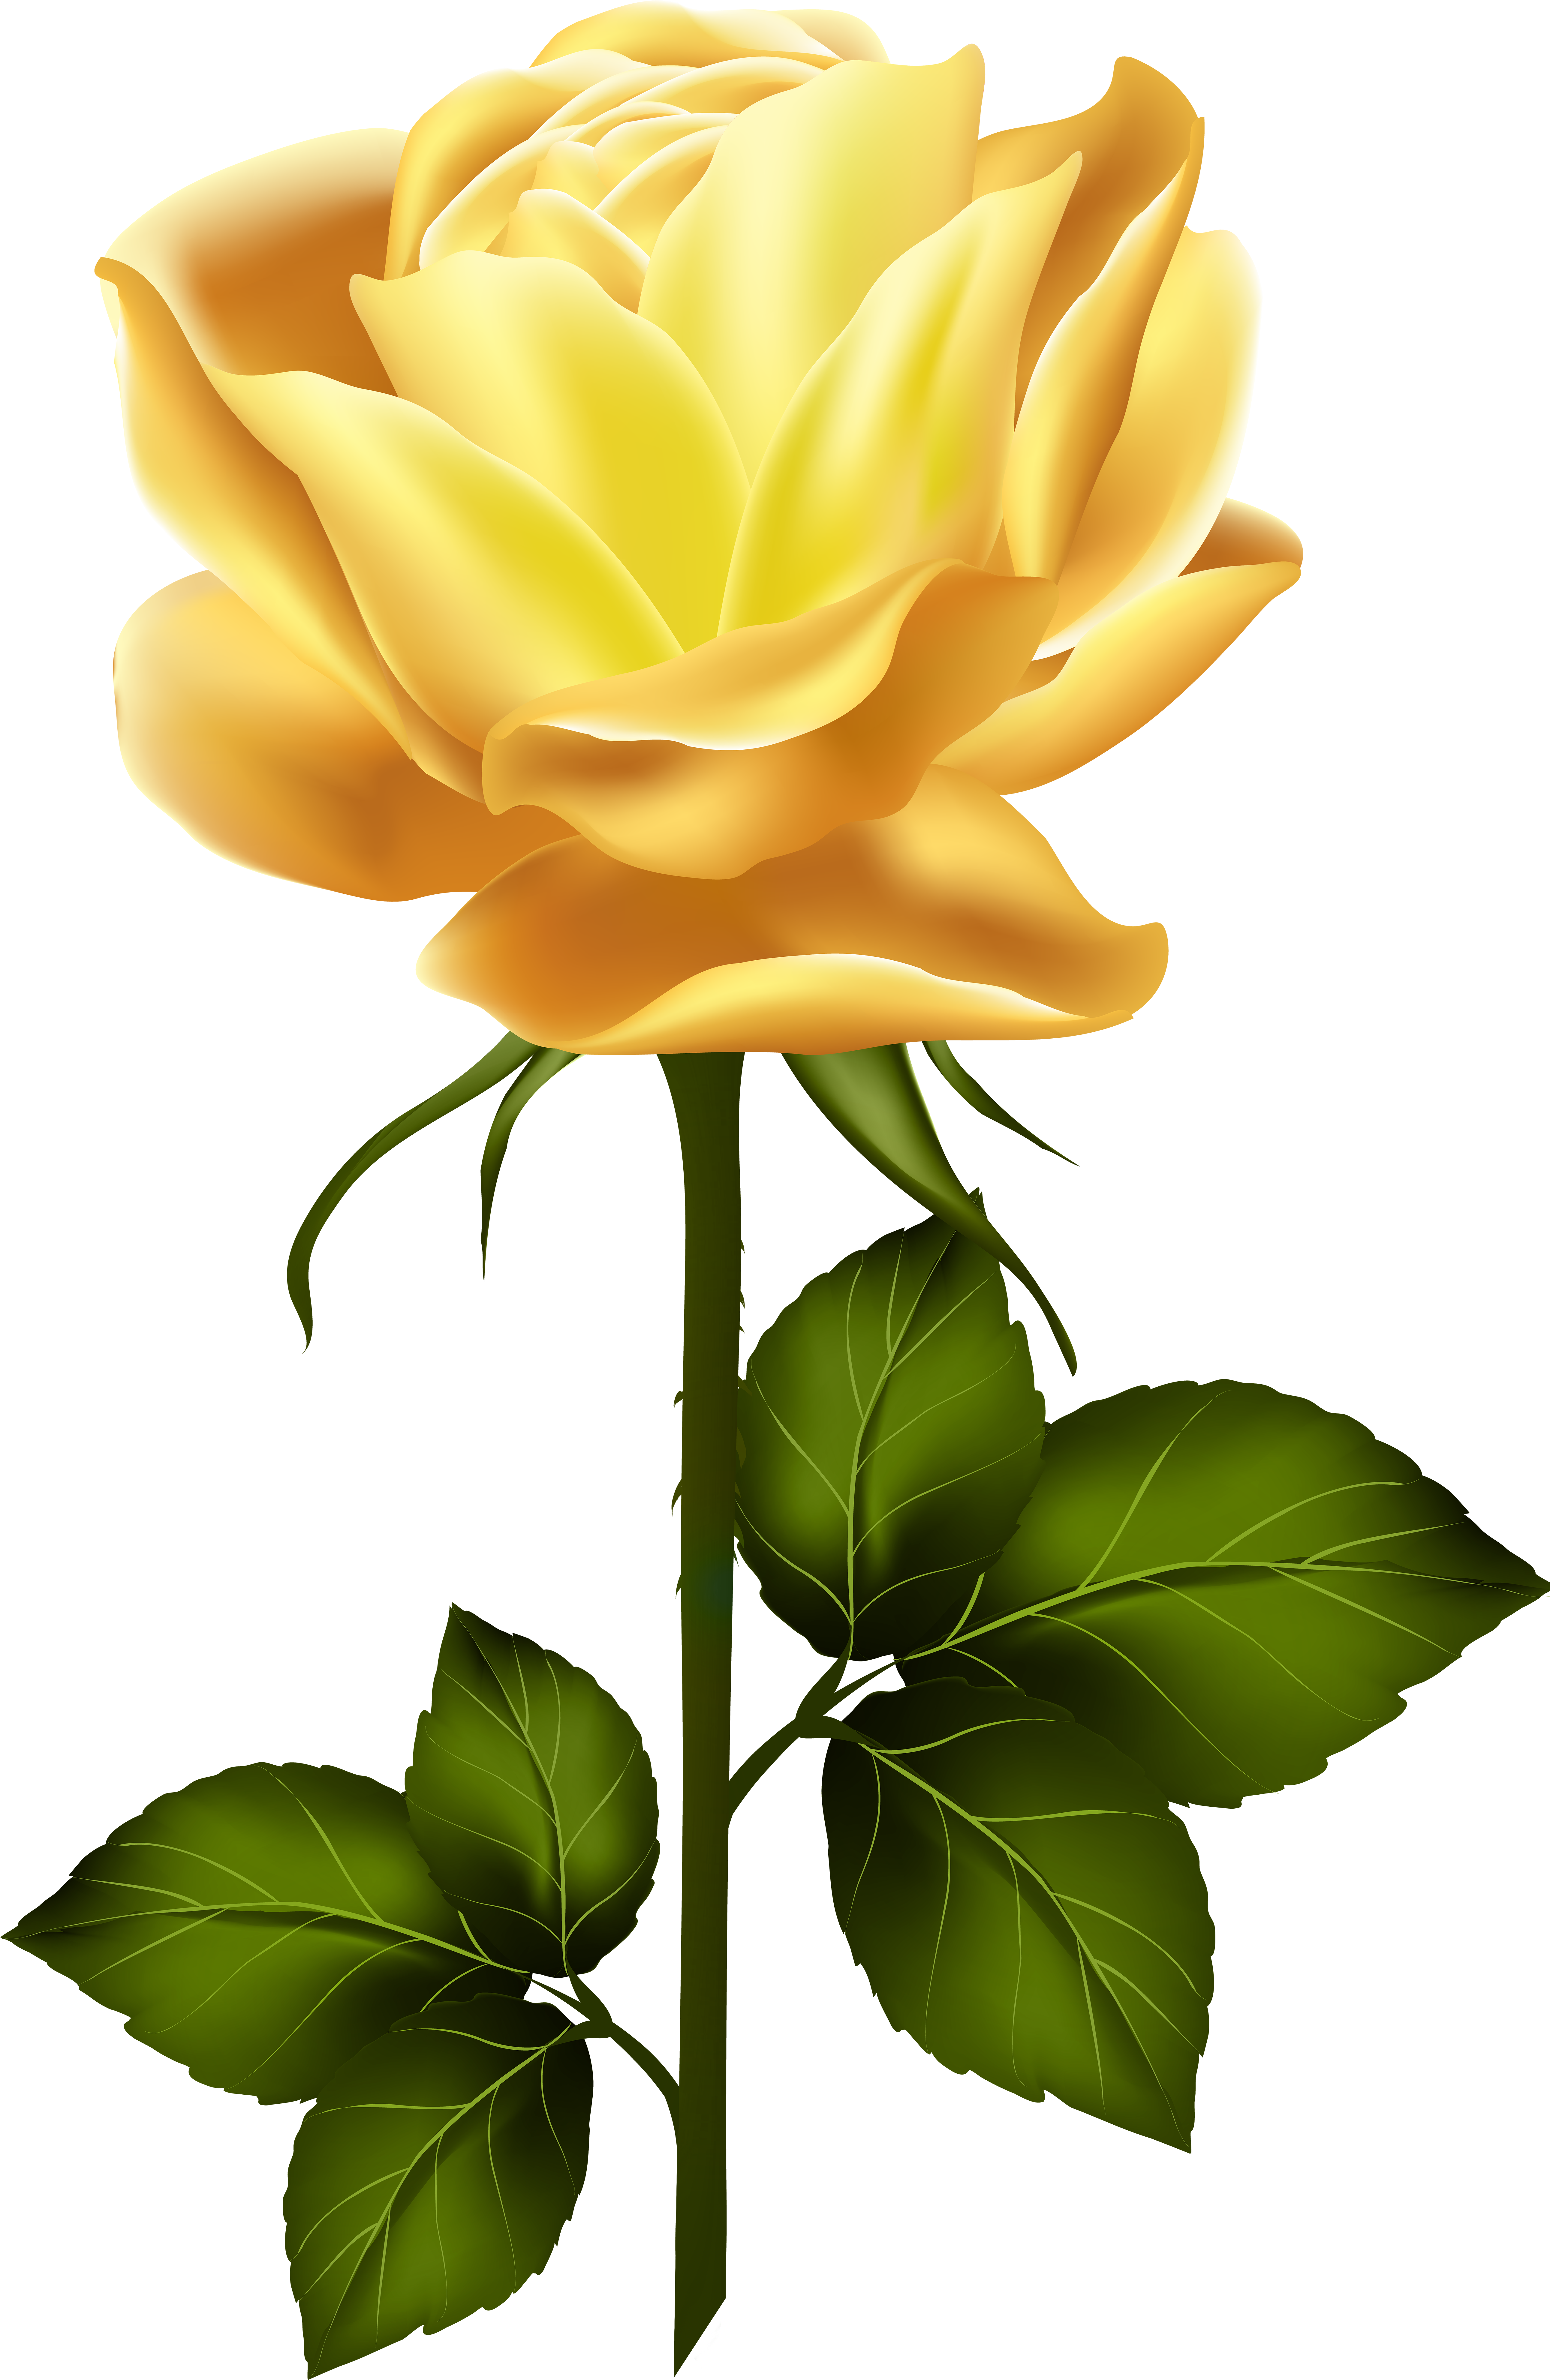 Download Clipart Roses Yellow Rose - Yellow Rose With Stem PNG Image with N...